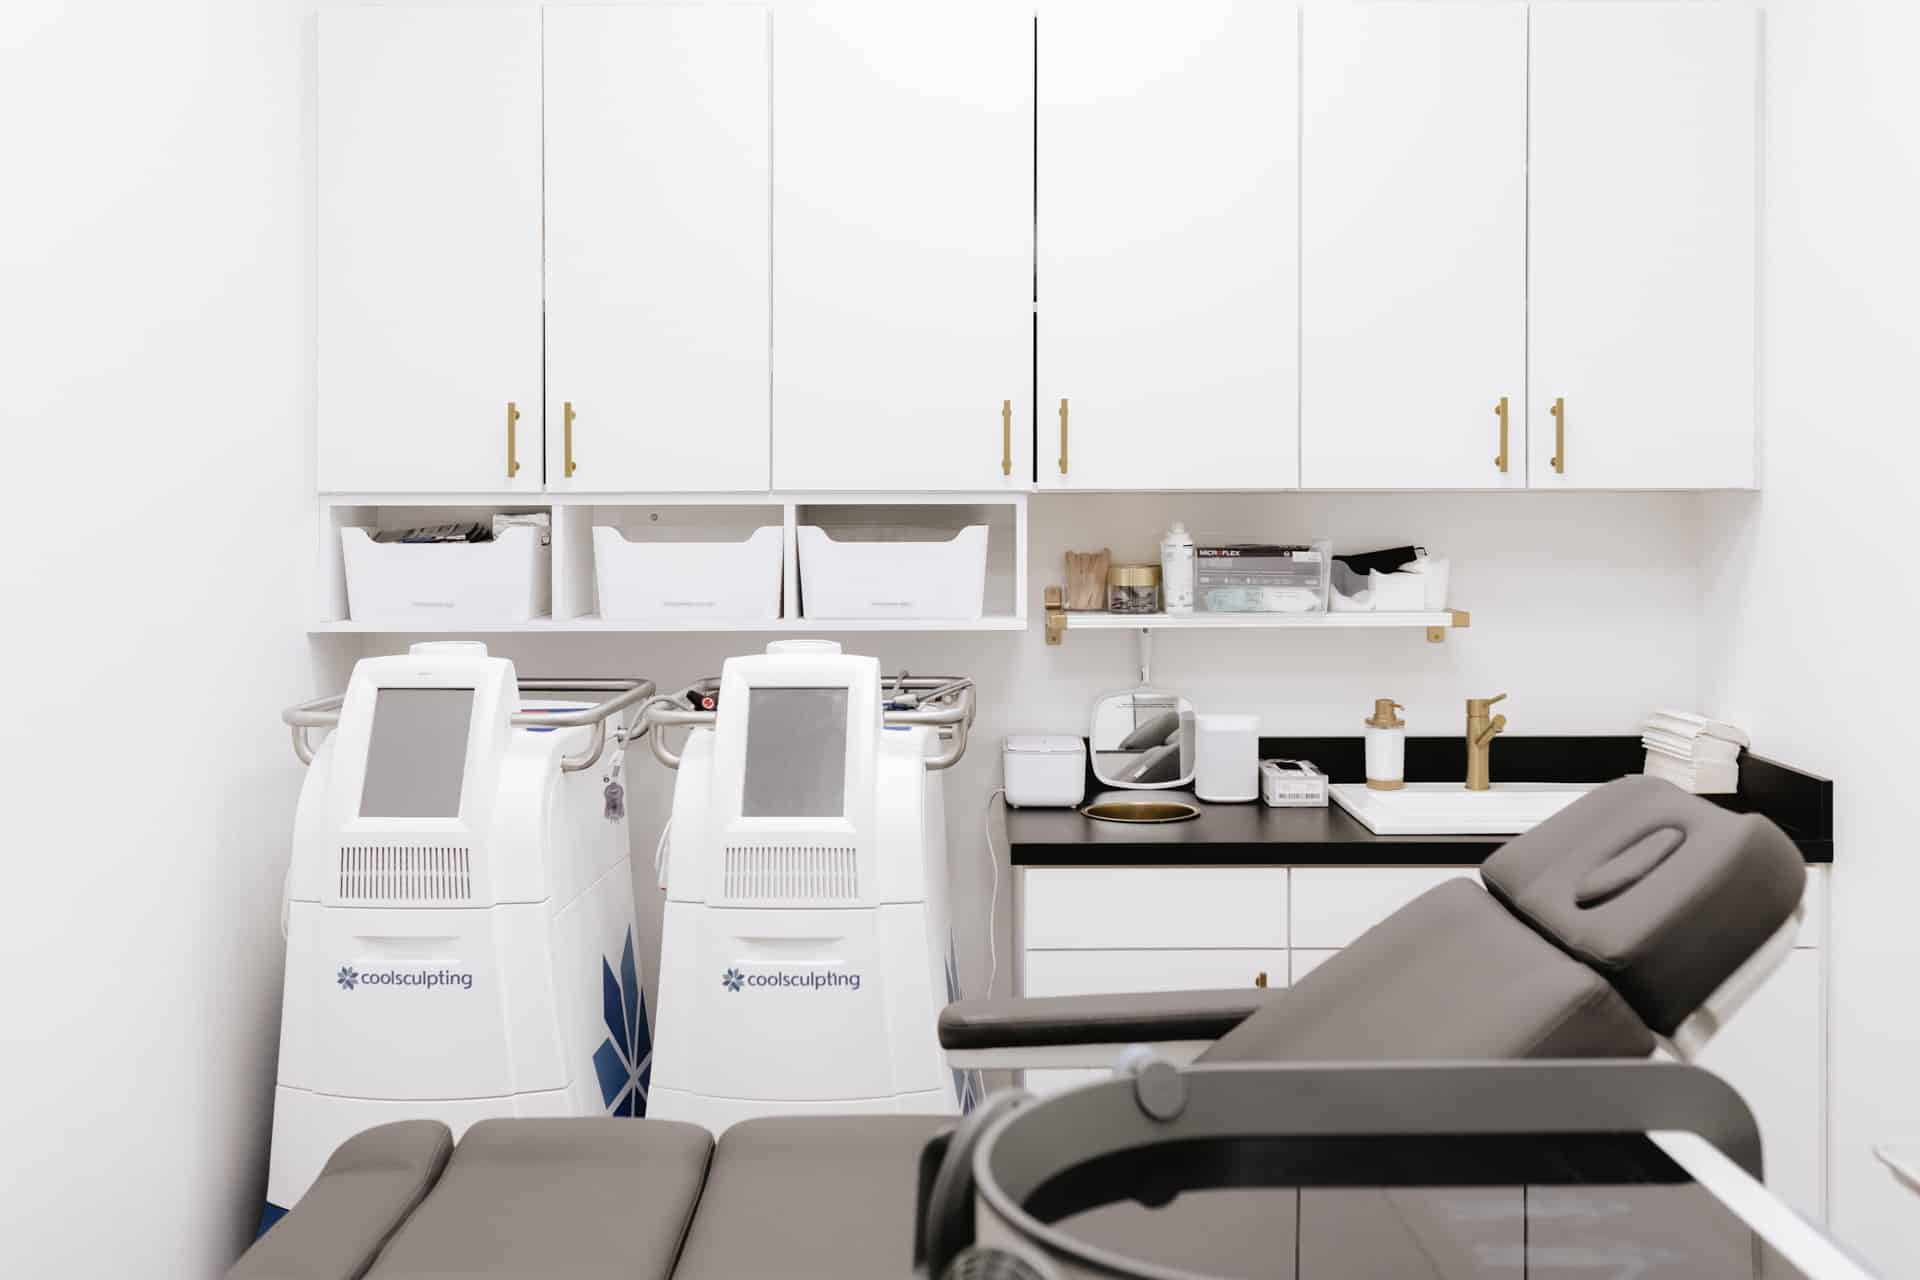 Coolsculpting machines in Addison, Texas